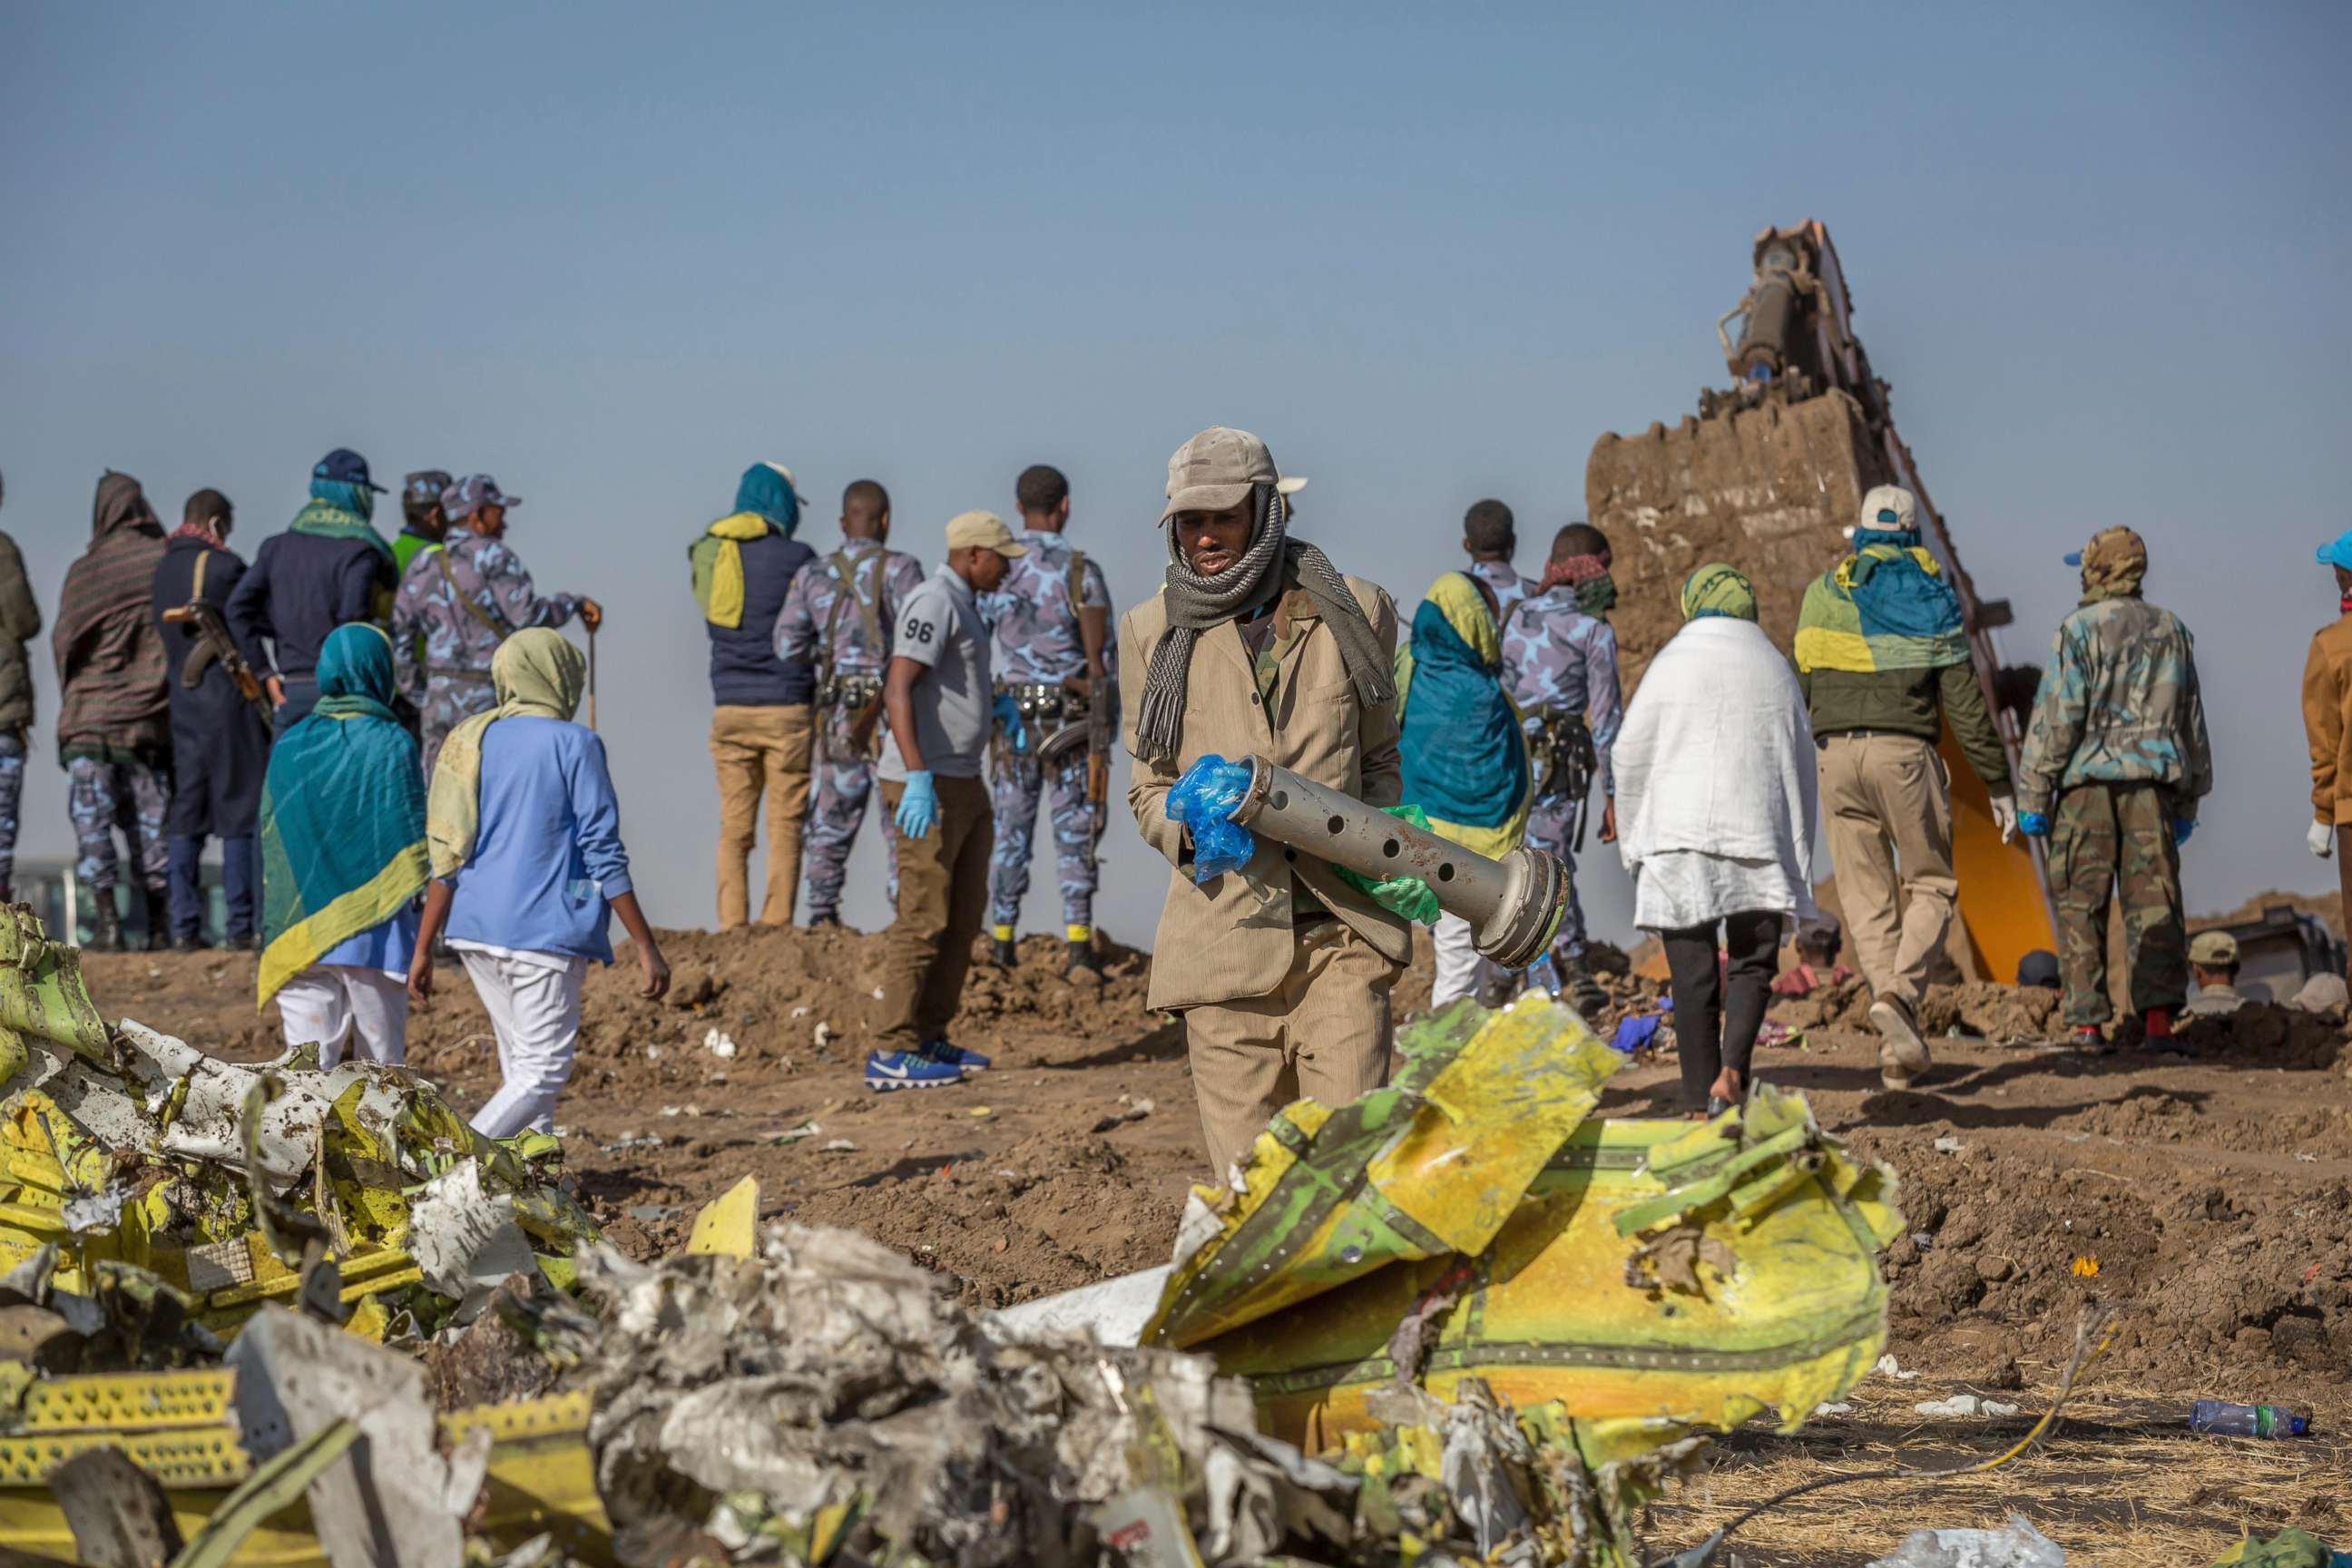 PHOTO: Workers gather at the scene of an Ethiopian Airlines flight crash near Bishoftu, south of Addis Ababa, Ethiopia, March 11, 2019.